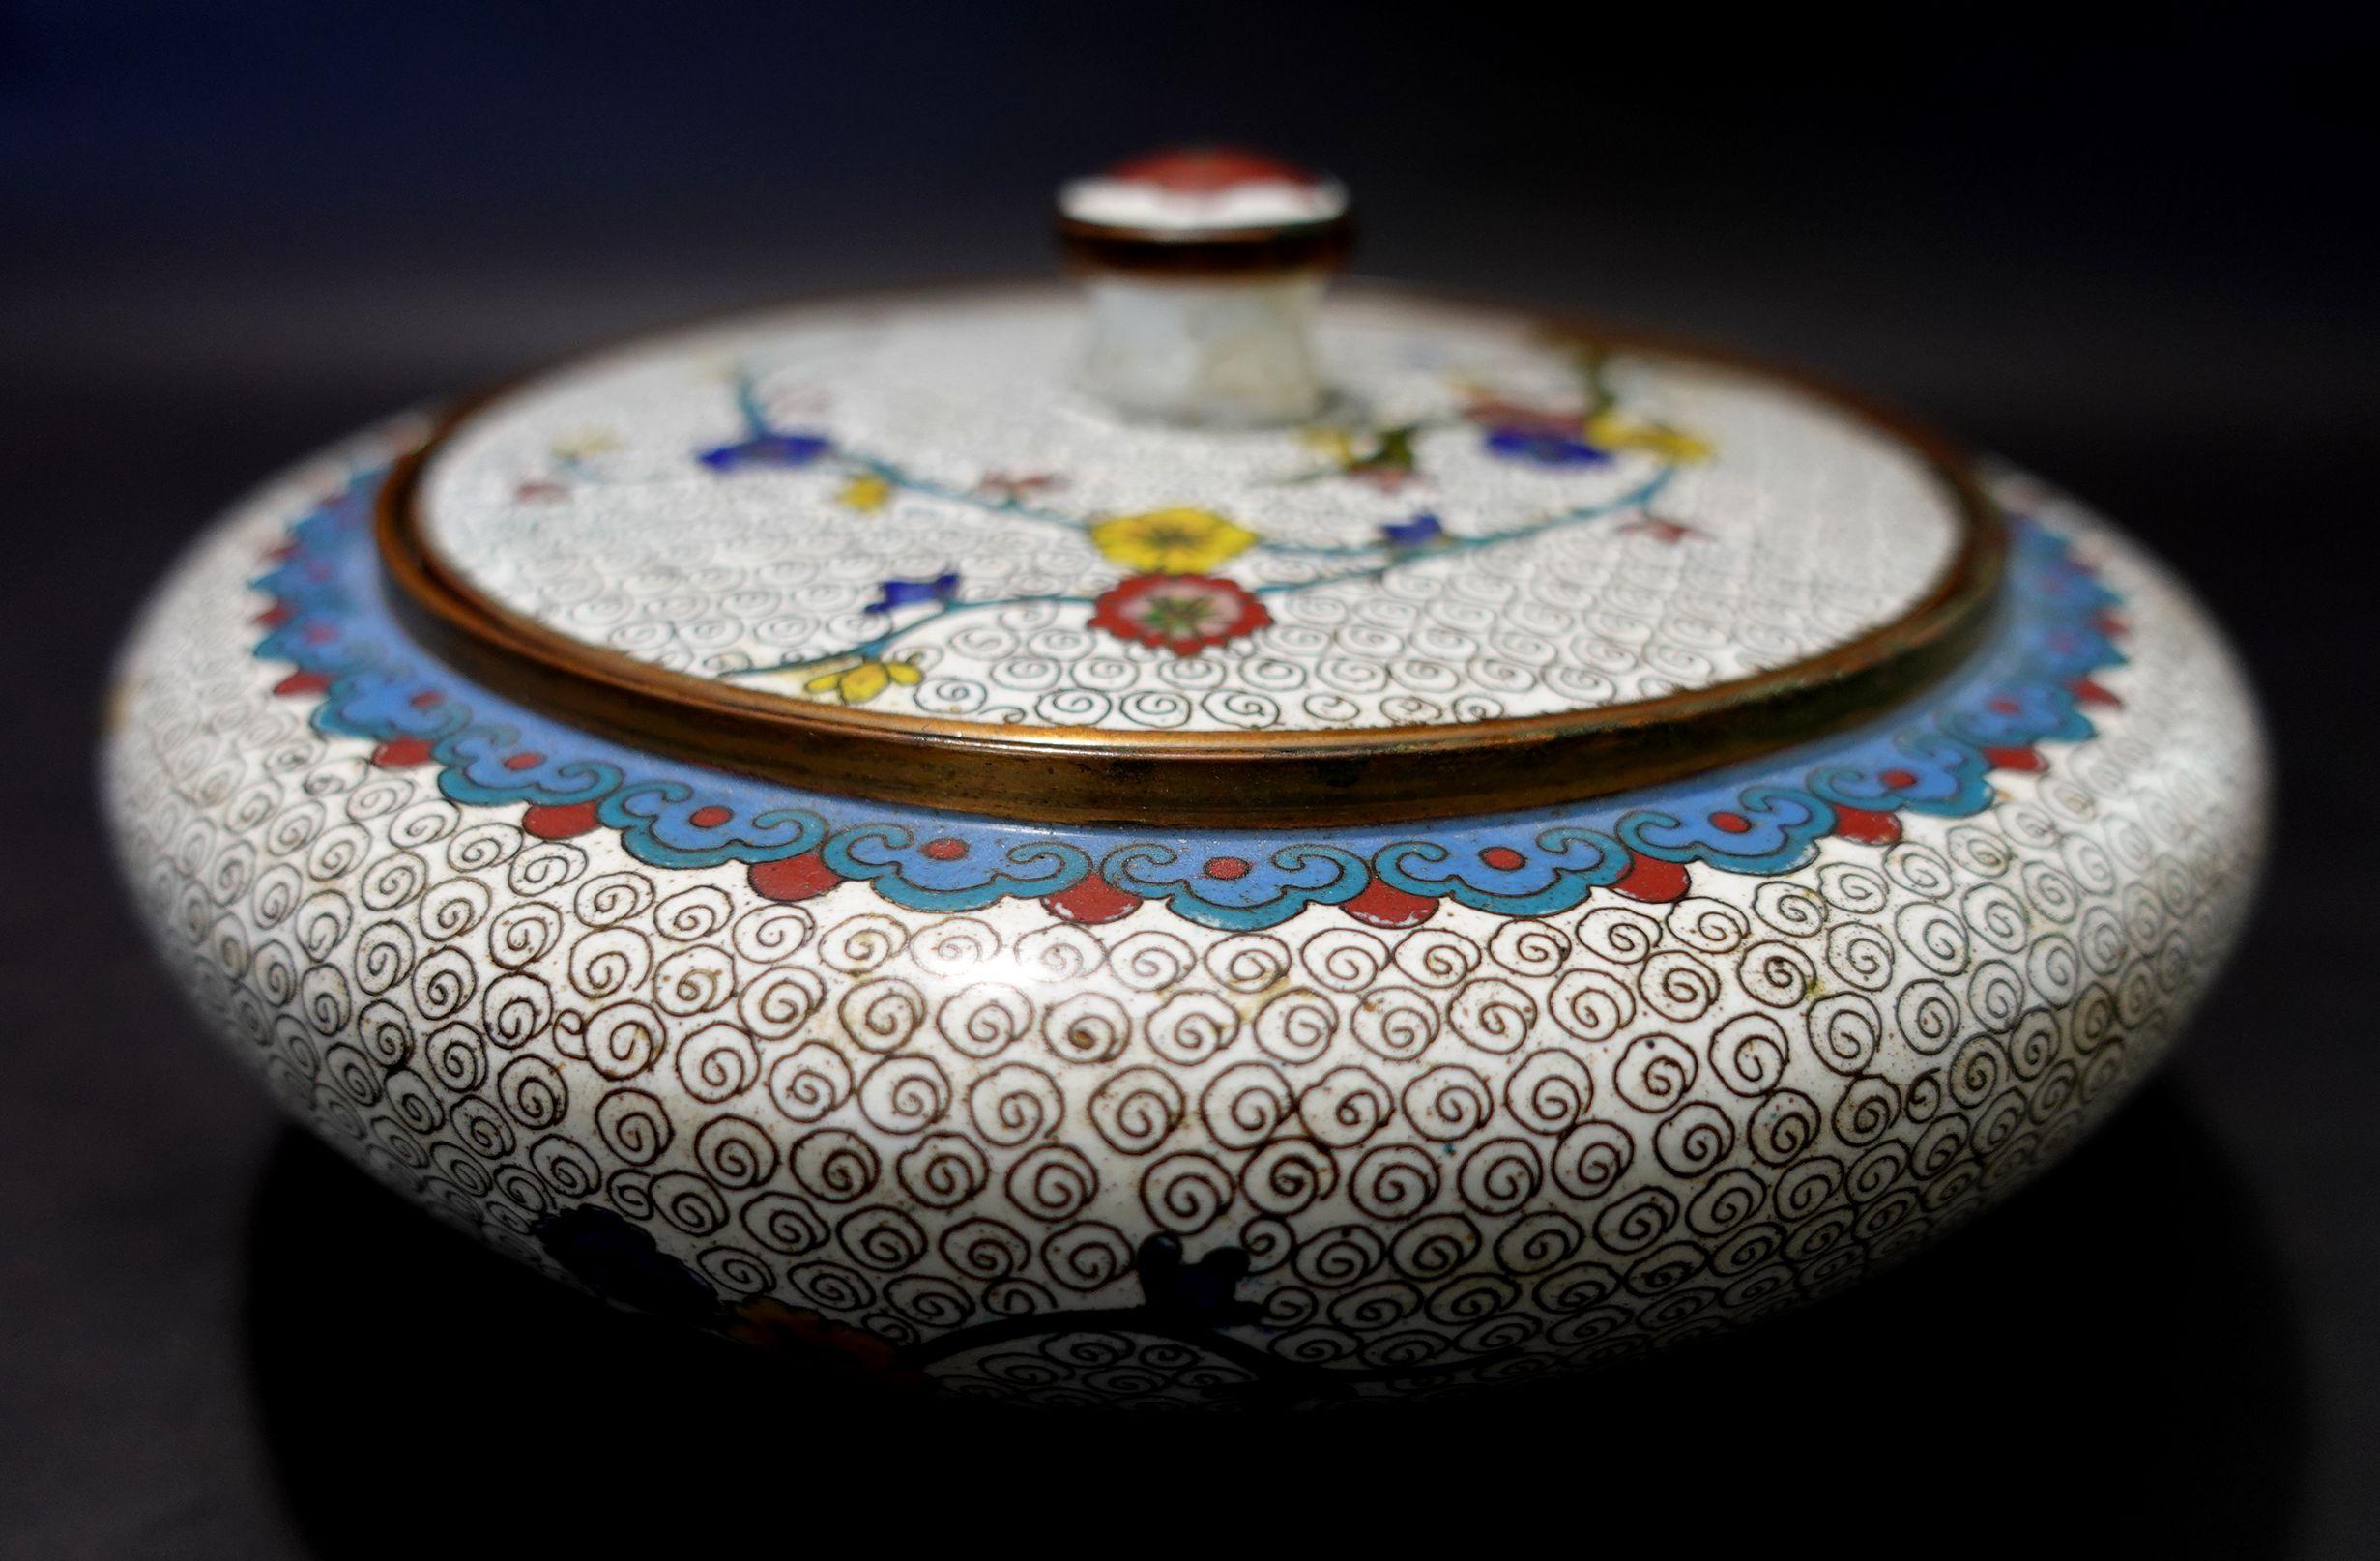 Antique Chinese cloisonné enamel round box with lid depicting floral patterns. A white base tone and colorful floral all around, from the 19th century.
